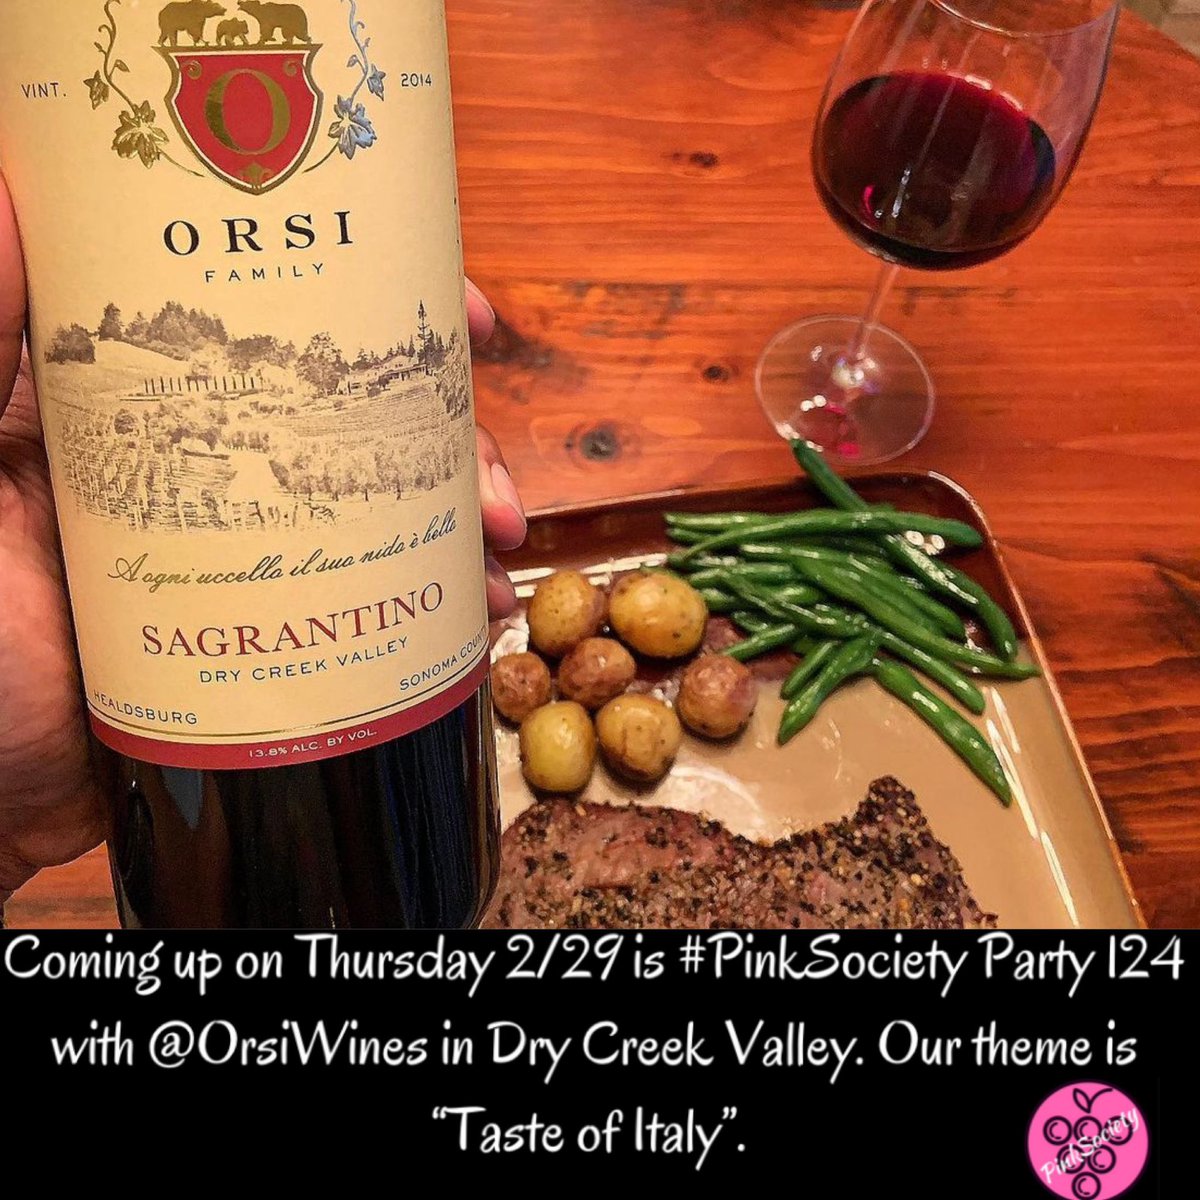 Coming up in an hour is our #TasteofItaly #PinkSociety Party with @orsiwines from @drycreekvalle. Come hang out with the cool kids at 6pm PT/9pm ET. Bring a friend. @boozychef @jflorez @AskRobY @KhanaMadeEasy @Be_U_Nique00 @LadyCWine @winedivaa @Wine4Frida @bobstelling